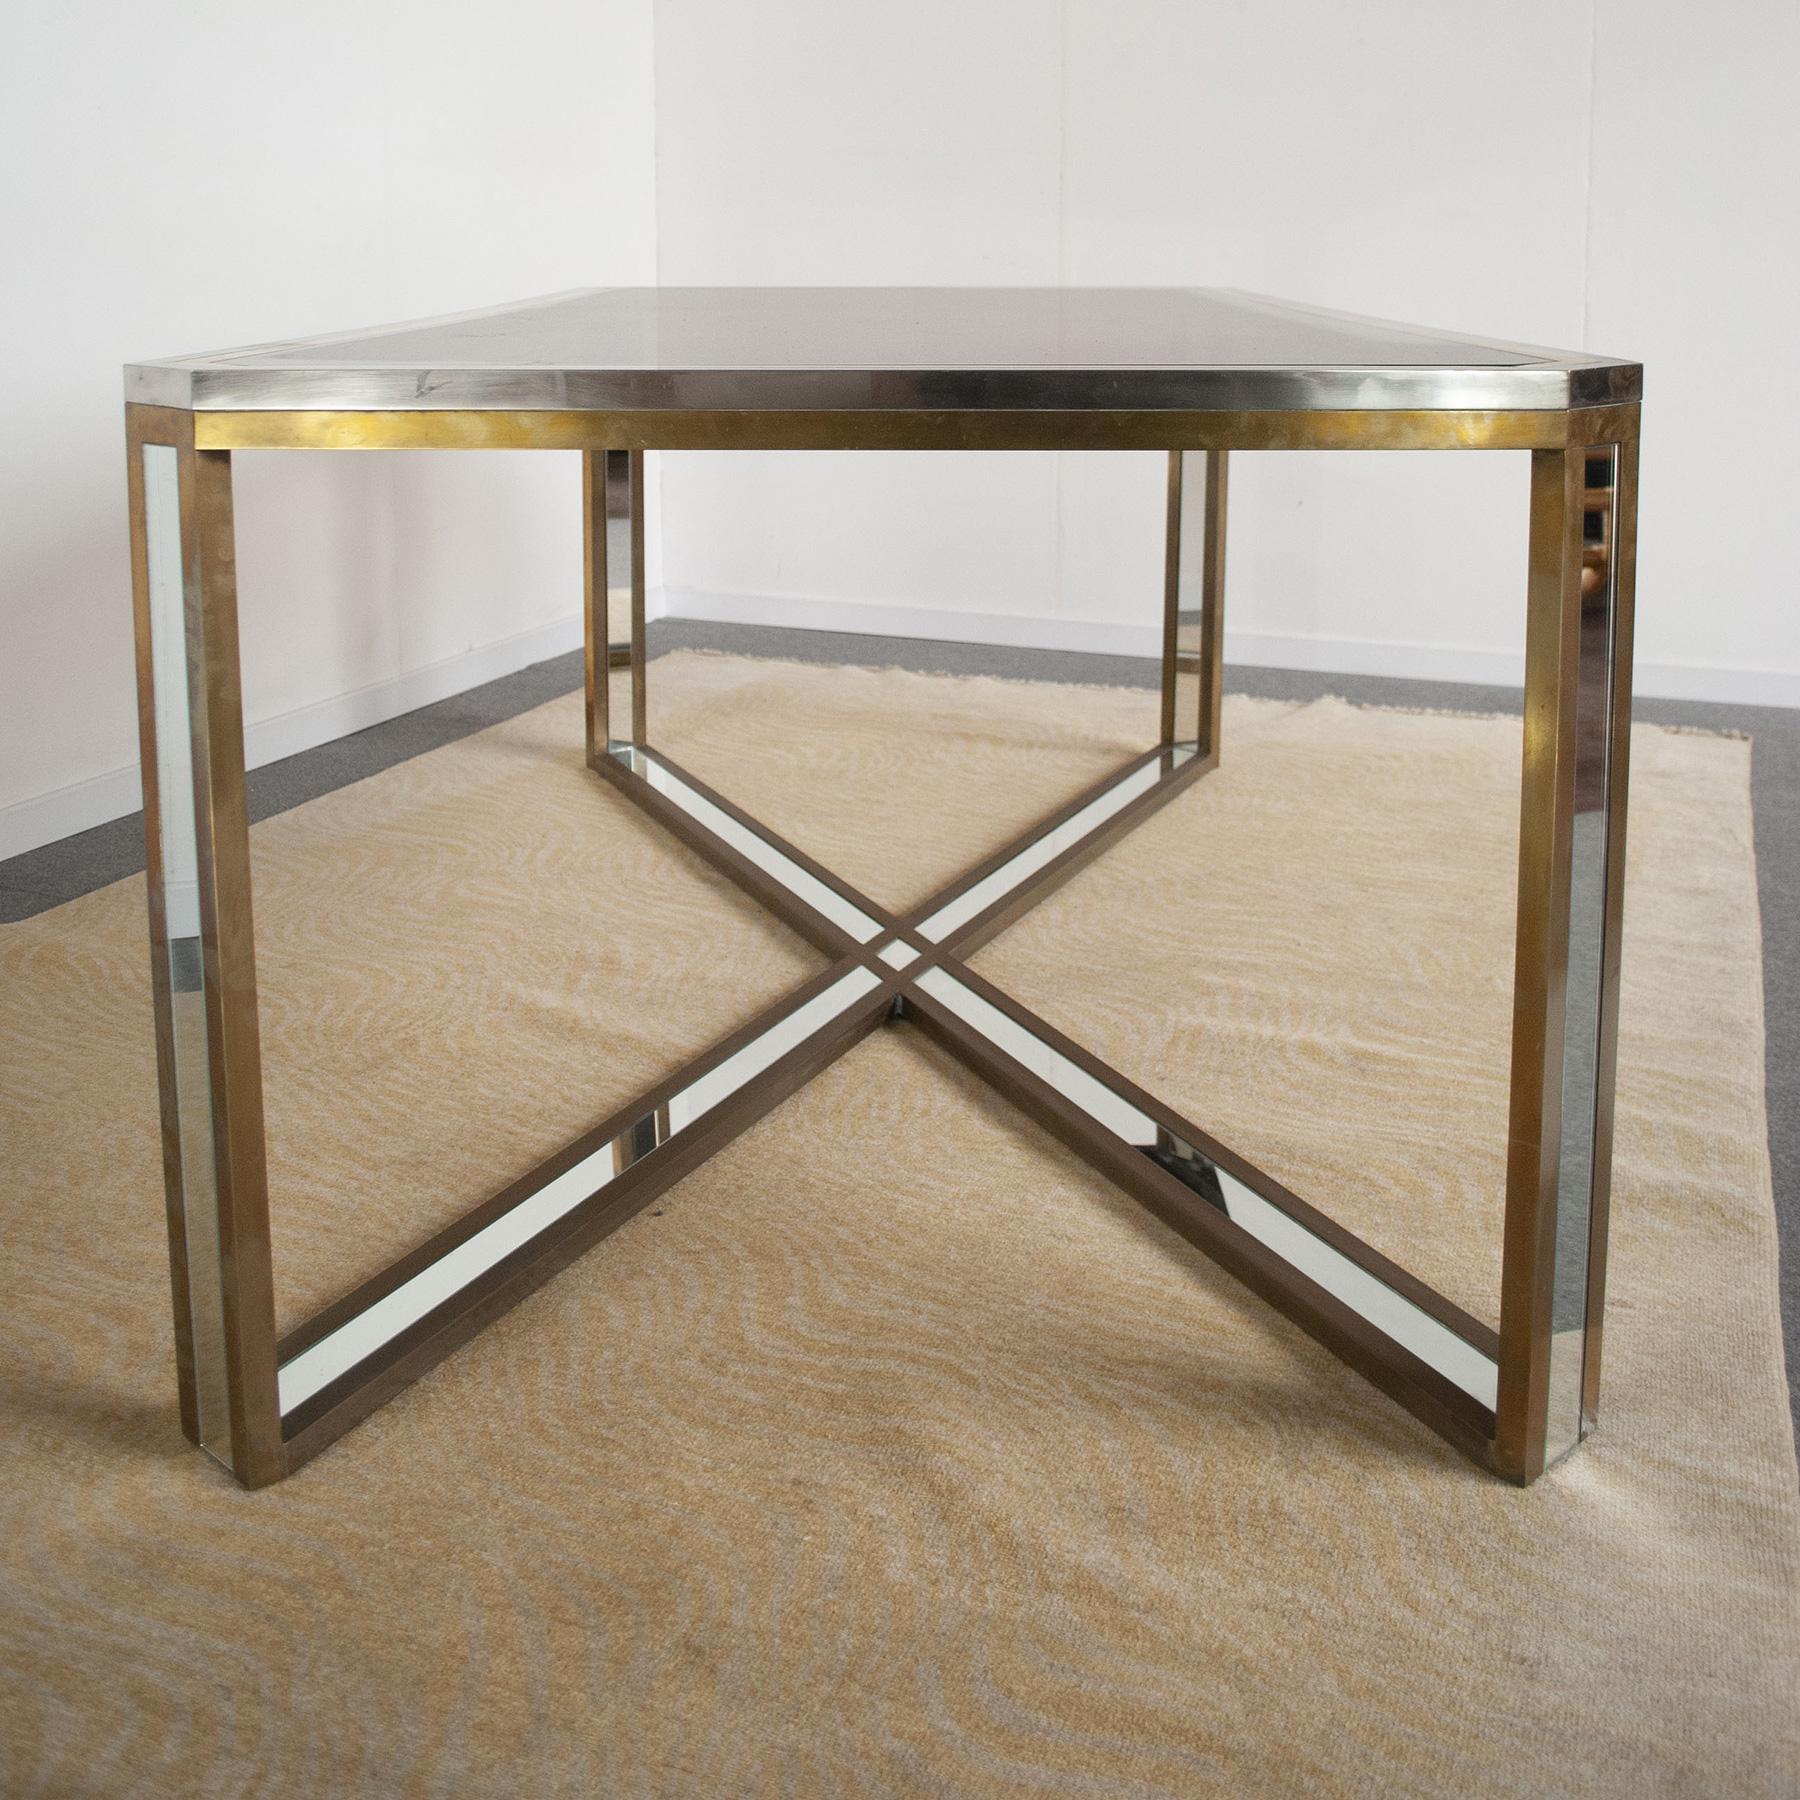 Romeo Rega 1970s Italian Midcentury Table in Stainless Steel, brass and Mirror For Sale 7